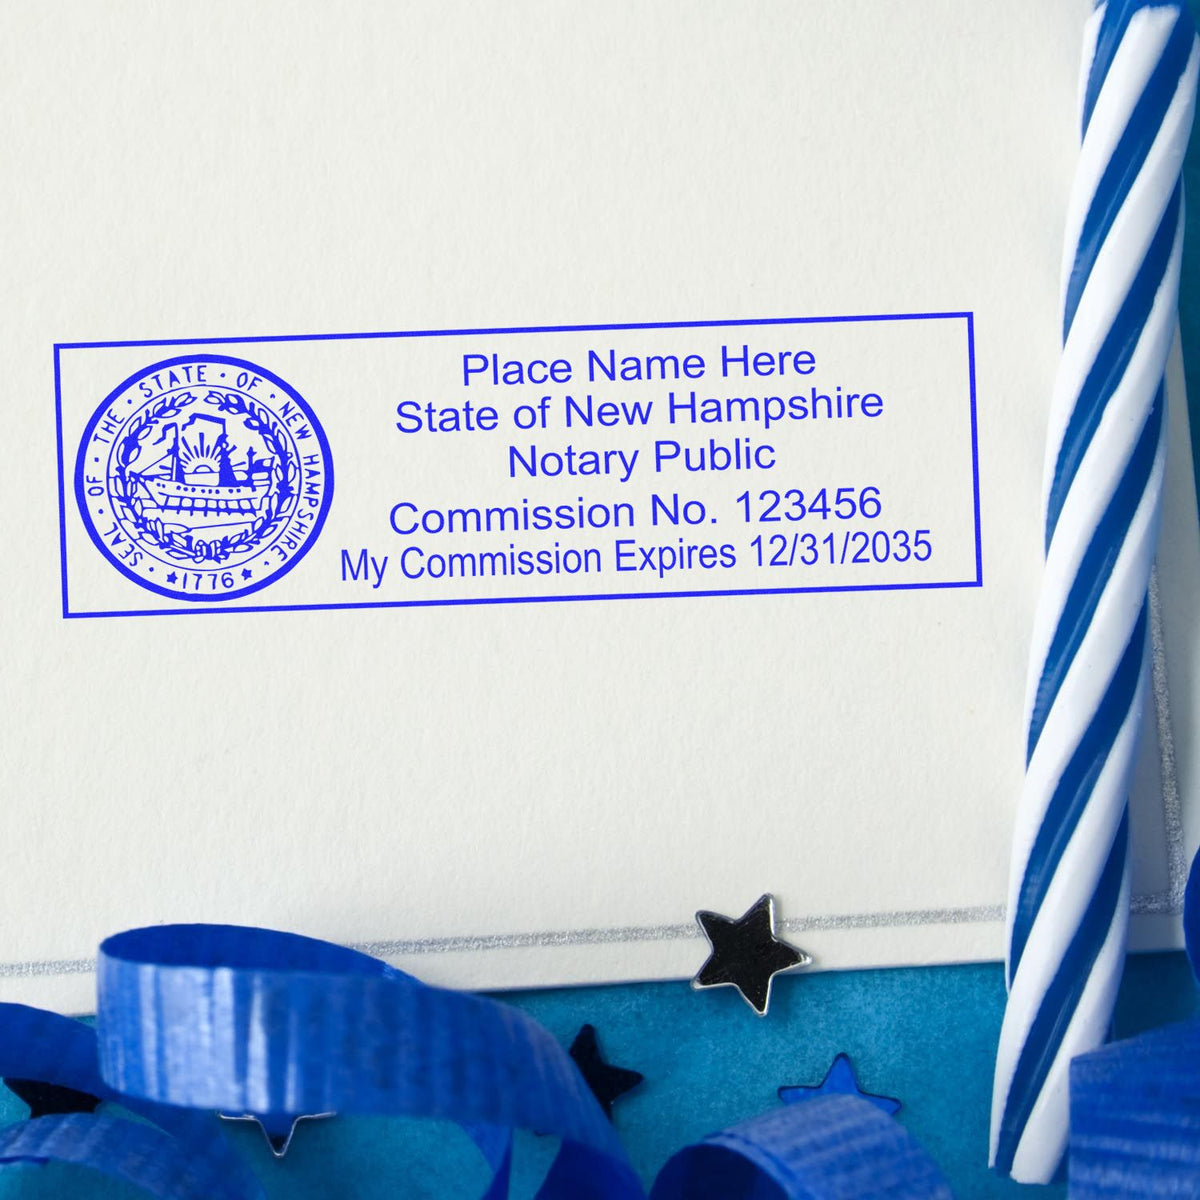 This paper is stamped with a sample imprint of the Wooden Handle New Hampshire State Seal Notary Public Stamp, signifying its quality and reliability.